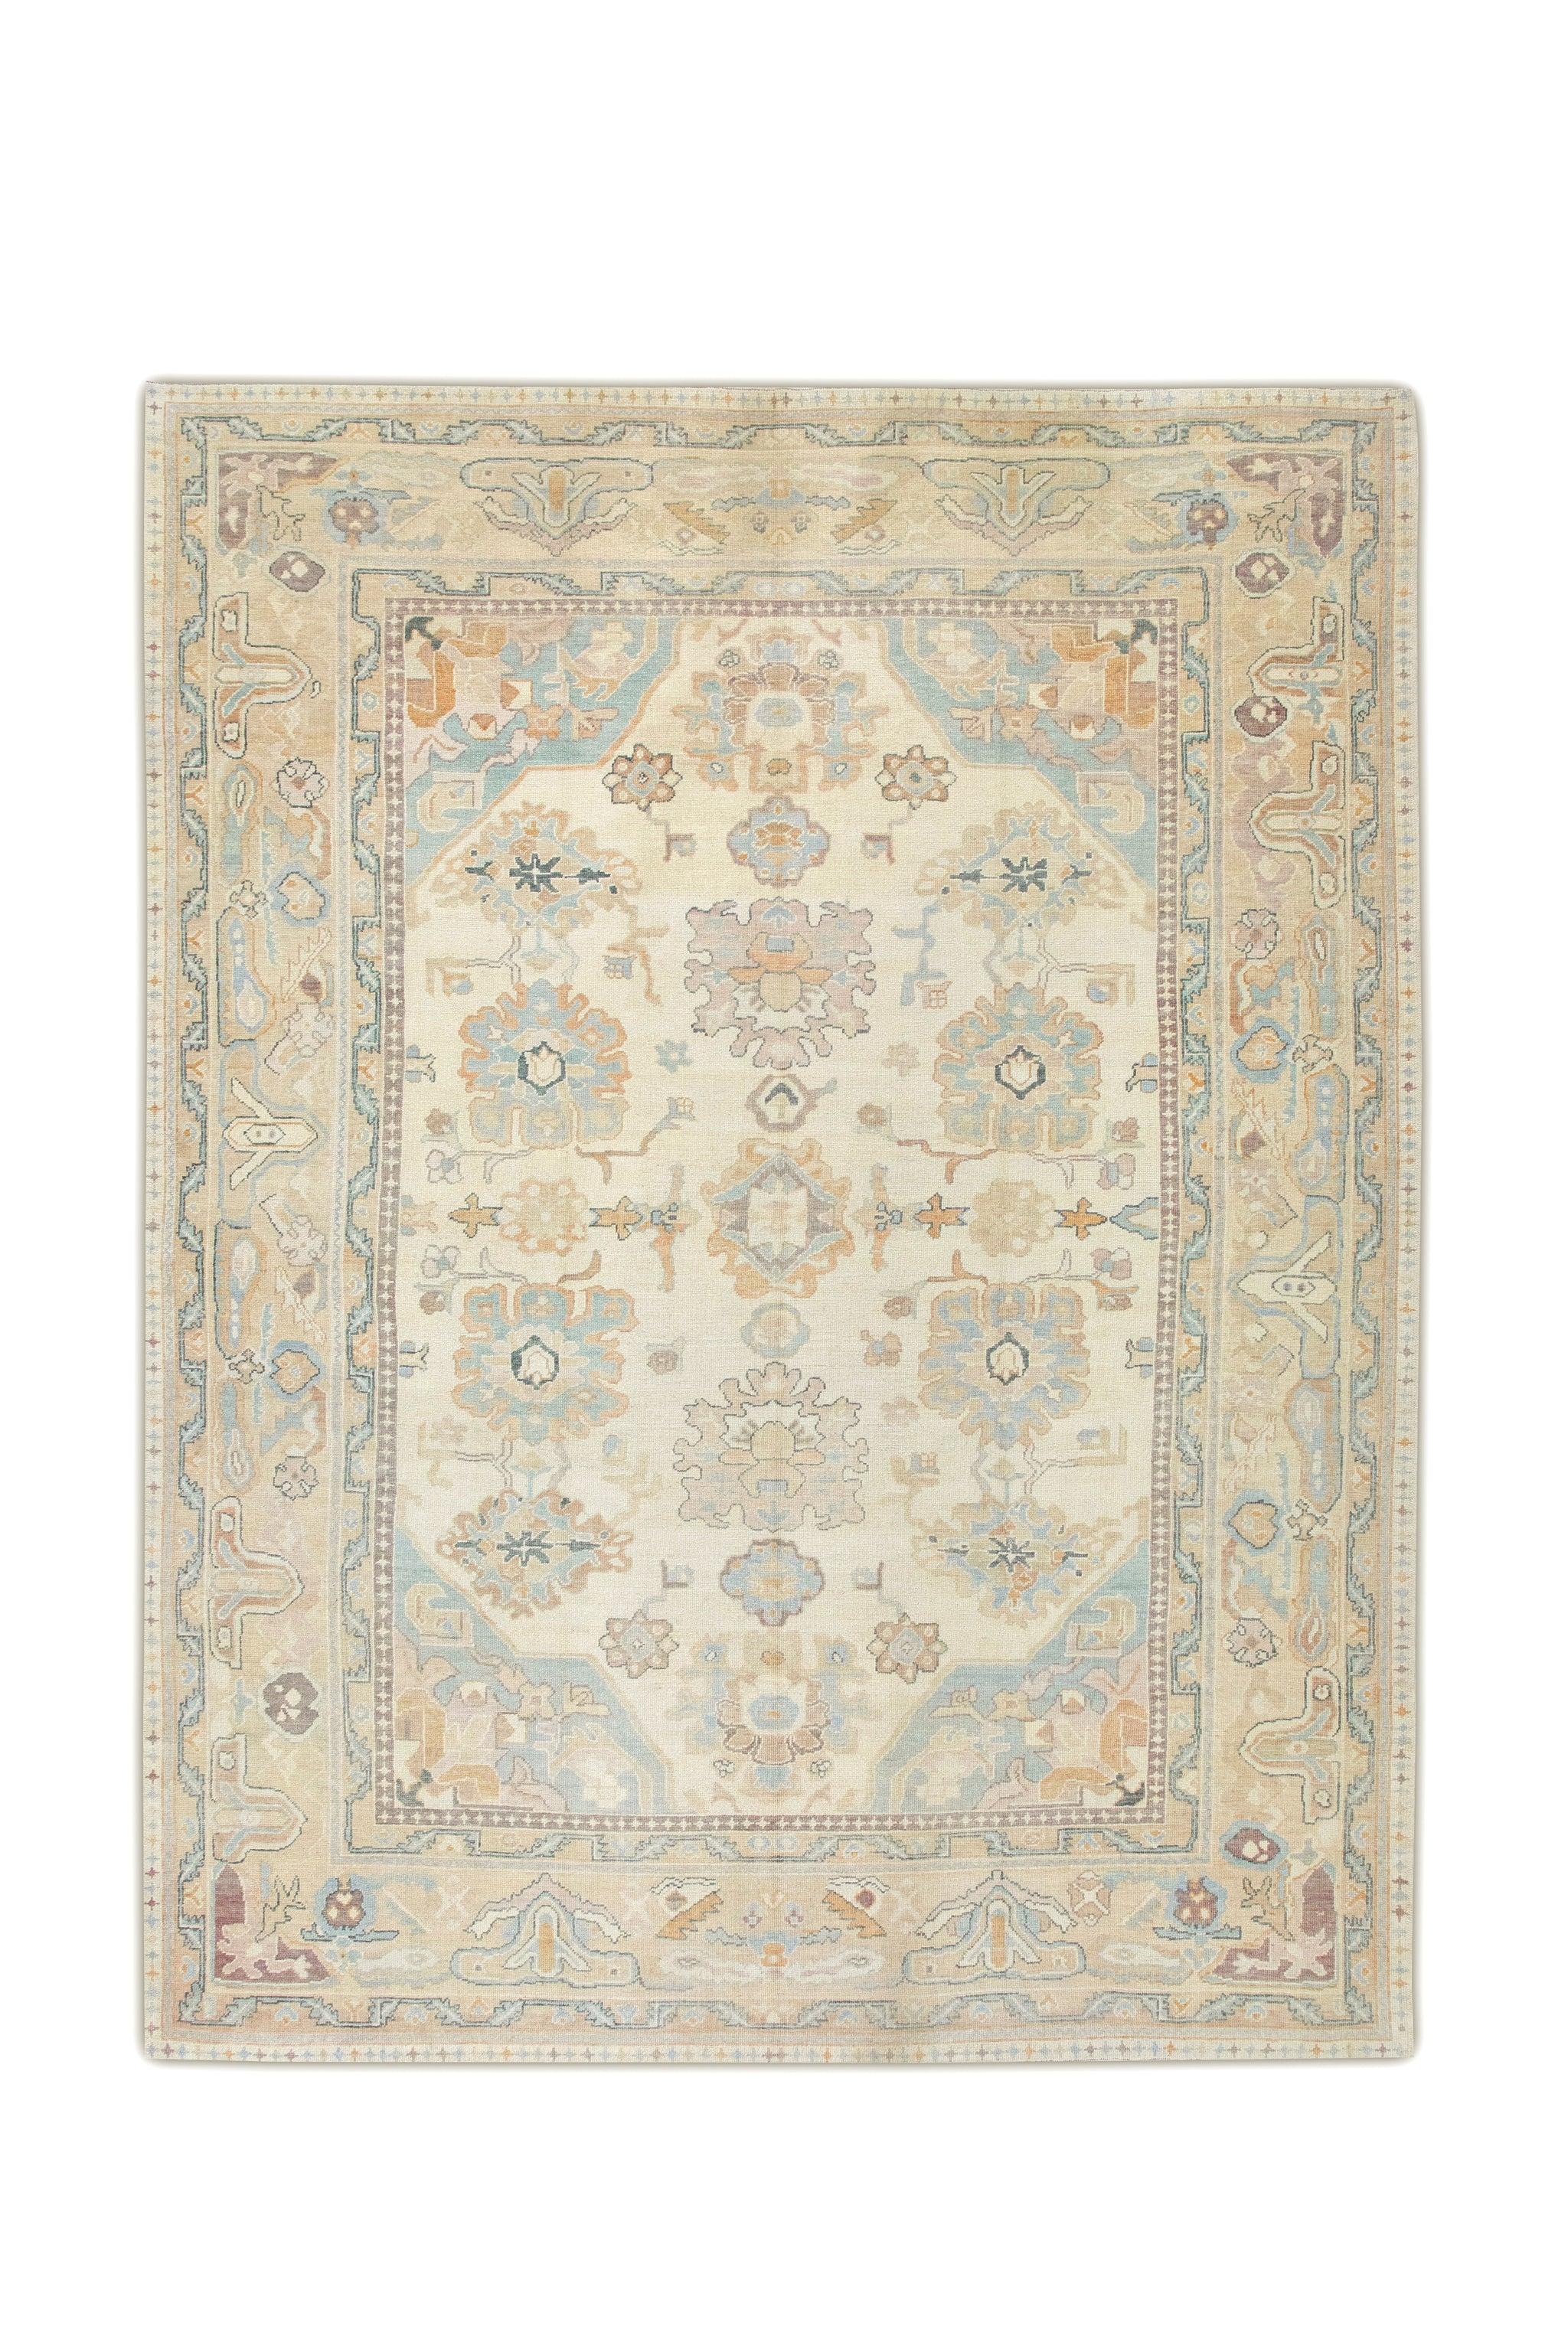 Tan Multicolor Floral Handwoven Wool Oversized Turkish Oushak Rug 11' x 15'3